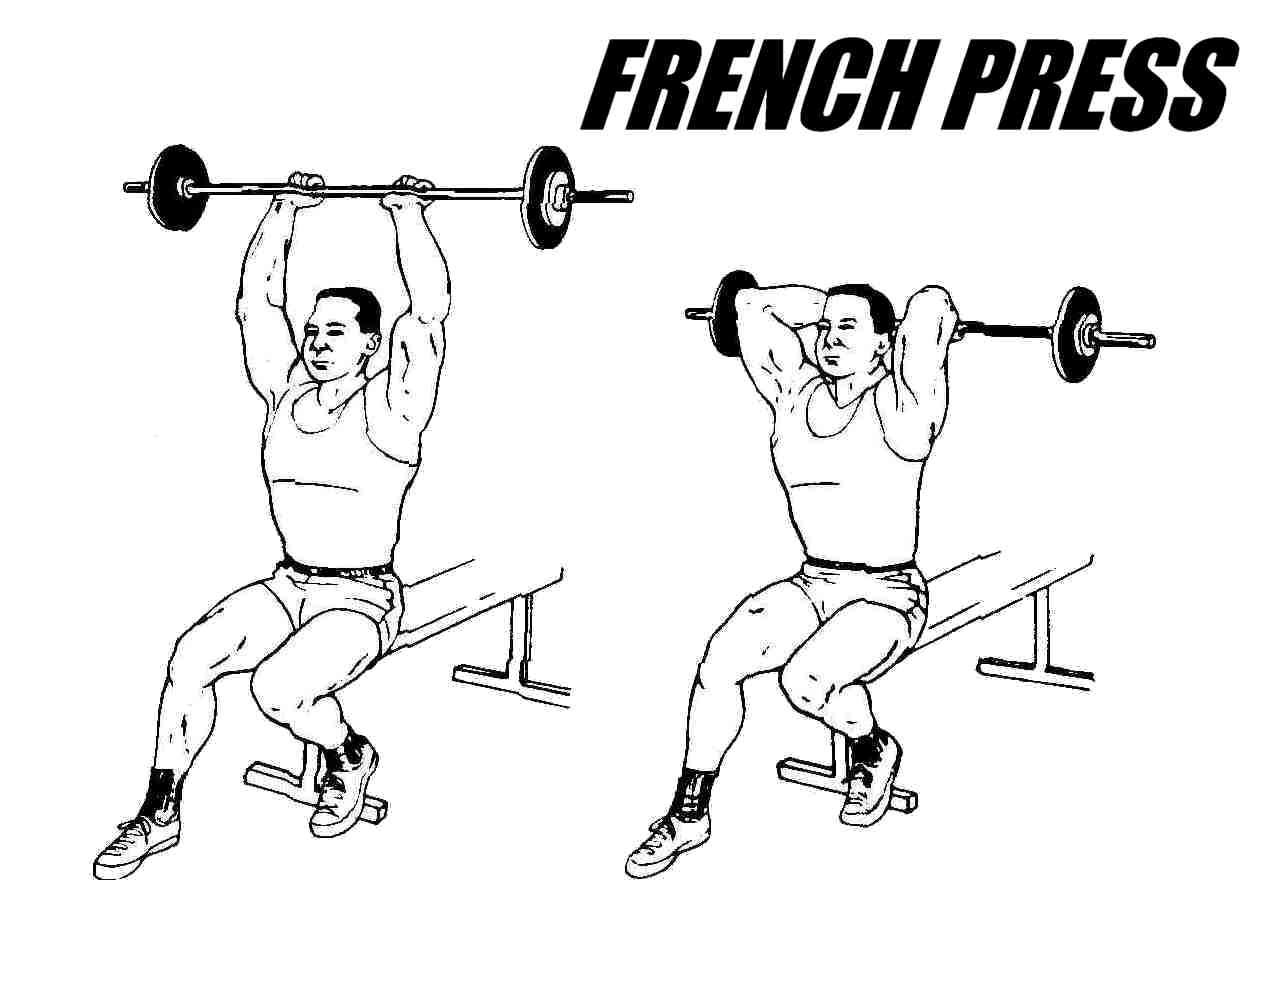 Dumbbell French Press - Exercise How-to EZ Bar French Press - YouTube Seate...